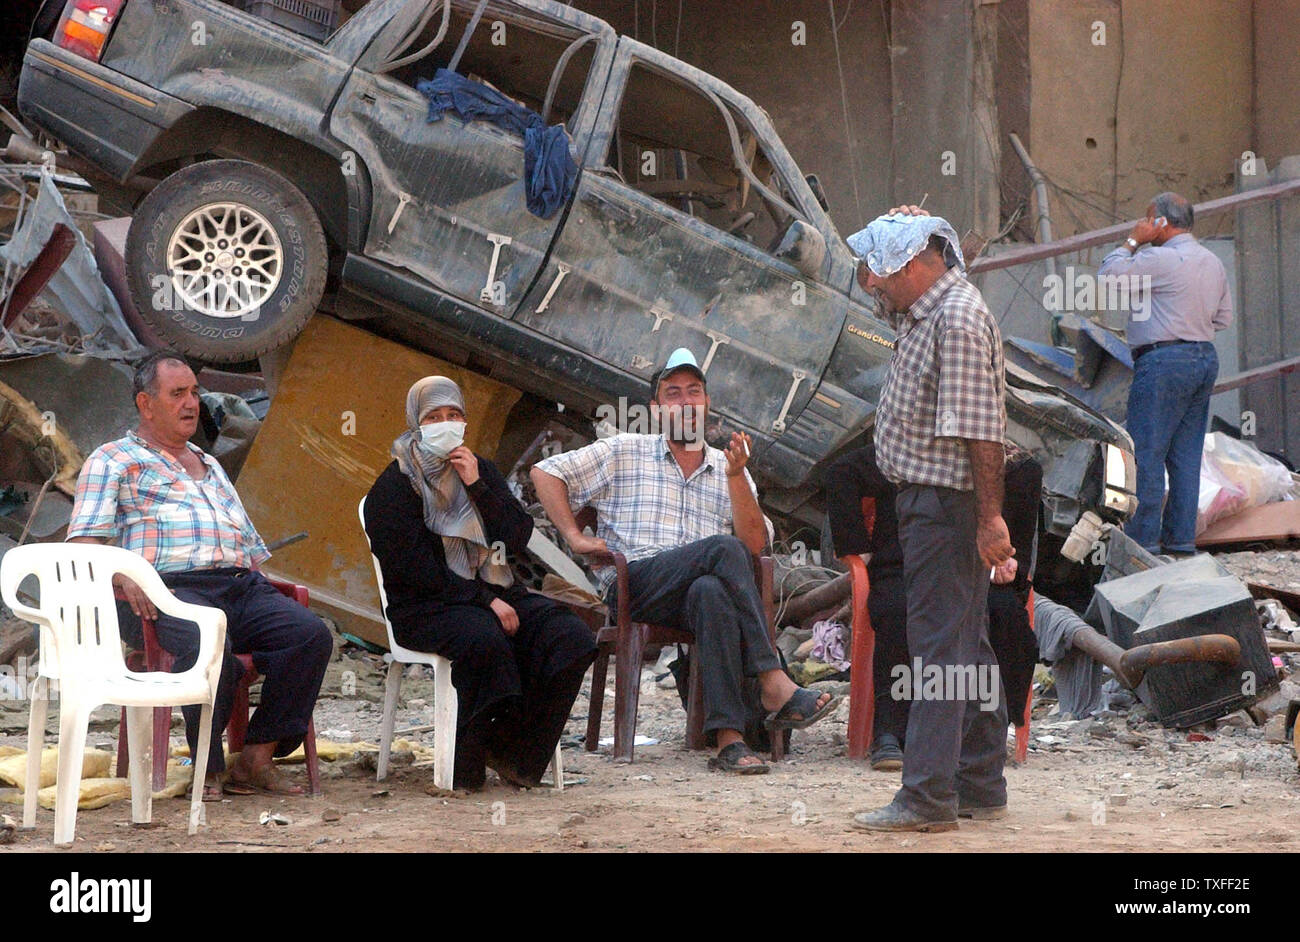 Residents of Beirut's southern suburbs take a break from searching in the rubble of their building for belongings on August 24, 2006. The Hezbollah organization is paying people who have lost property a stipend to relocate until their own home can be rebuilt. (UPI Photo) Stock Photo